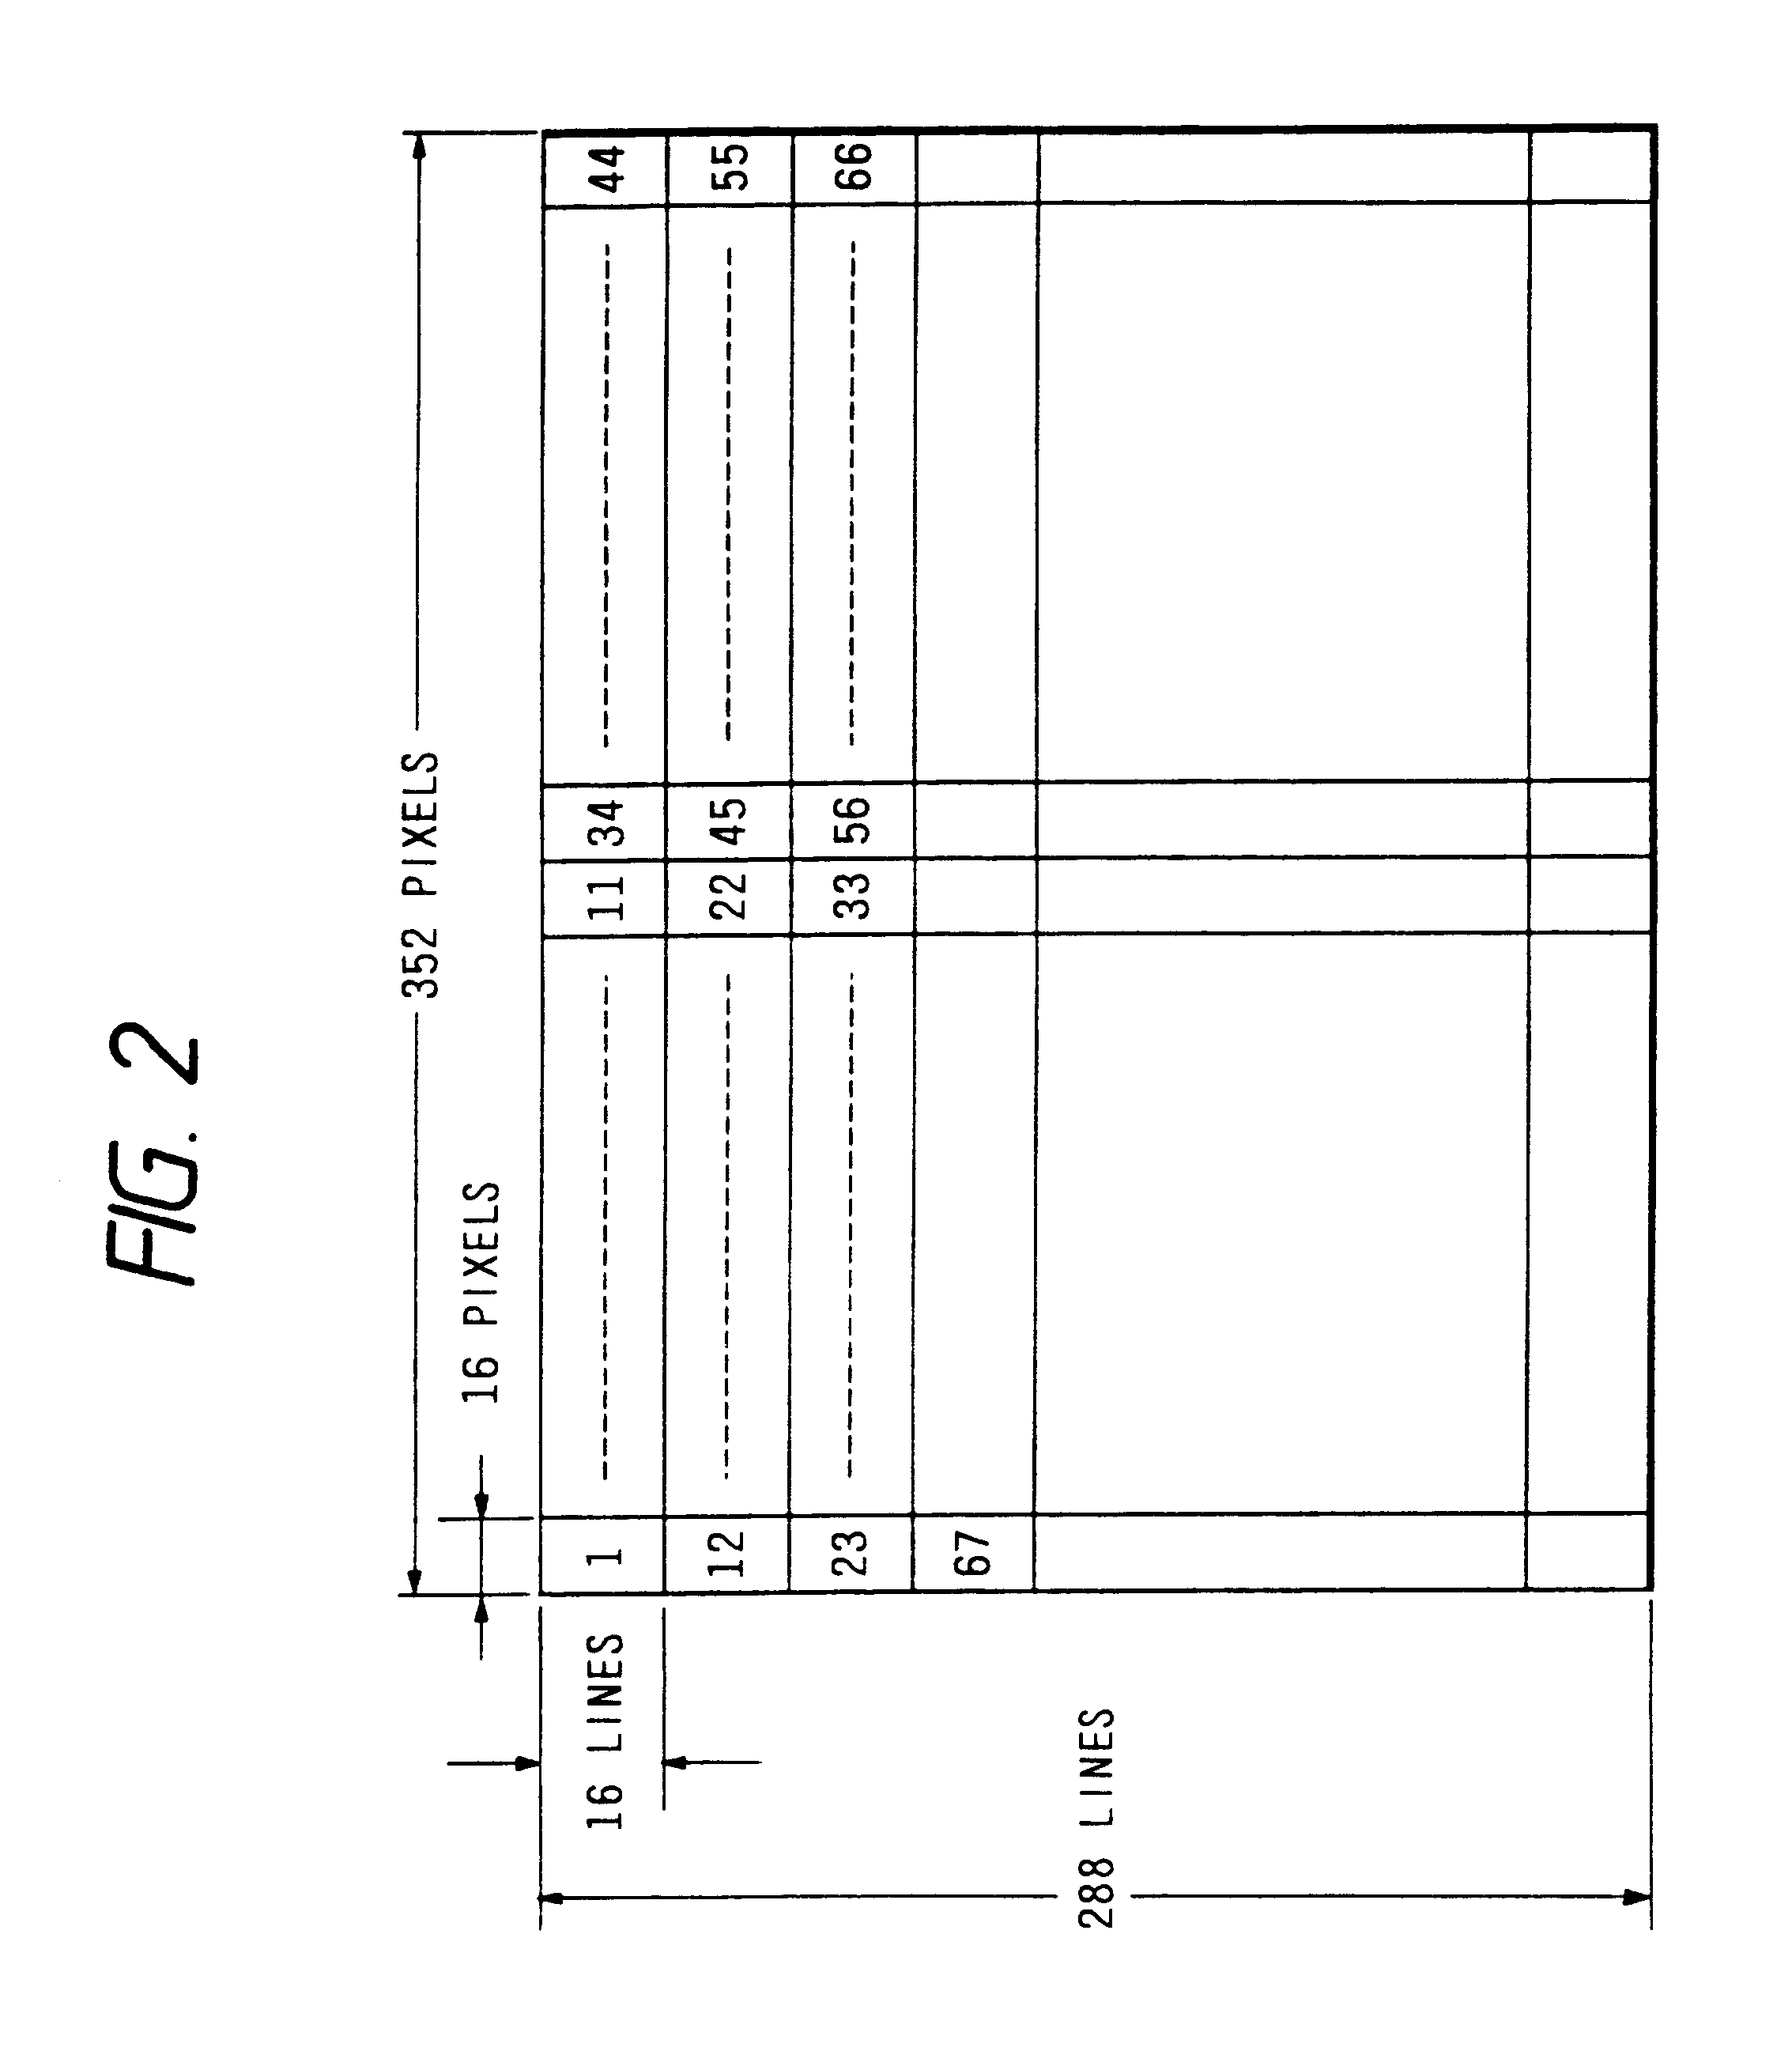 Motion compensated prediction interframe coding system